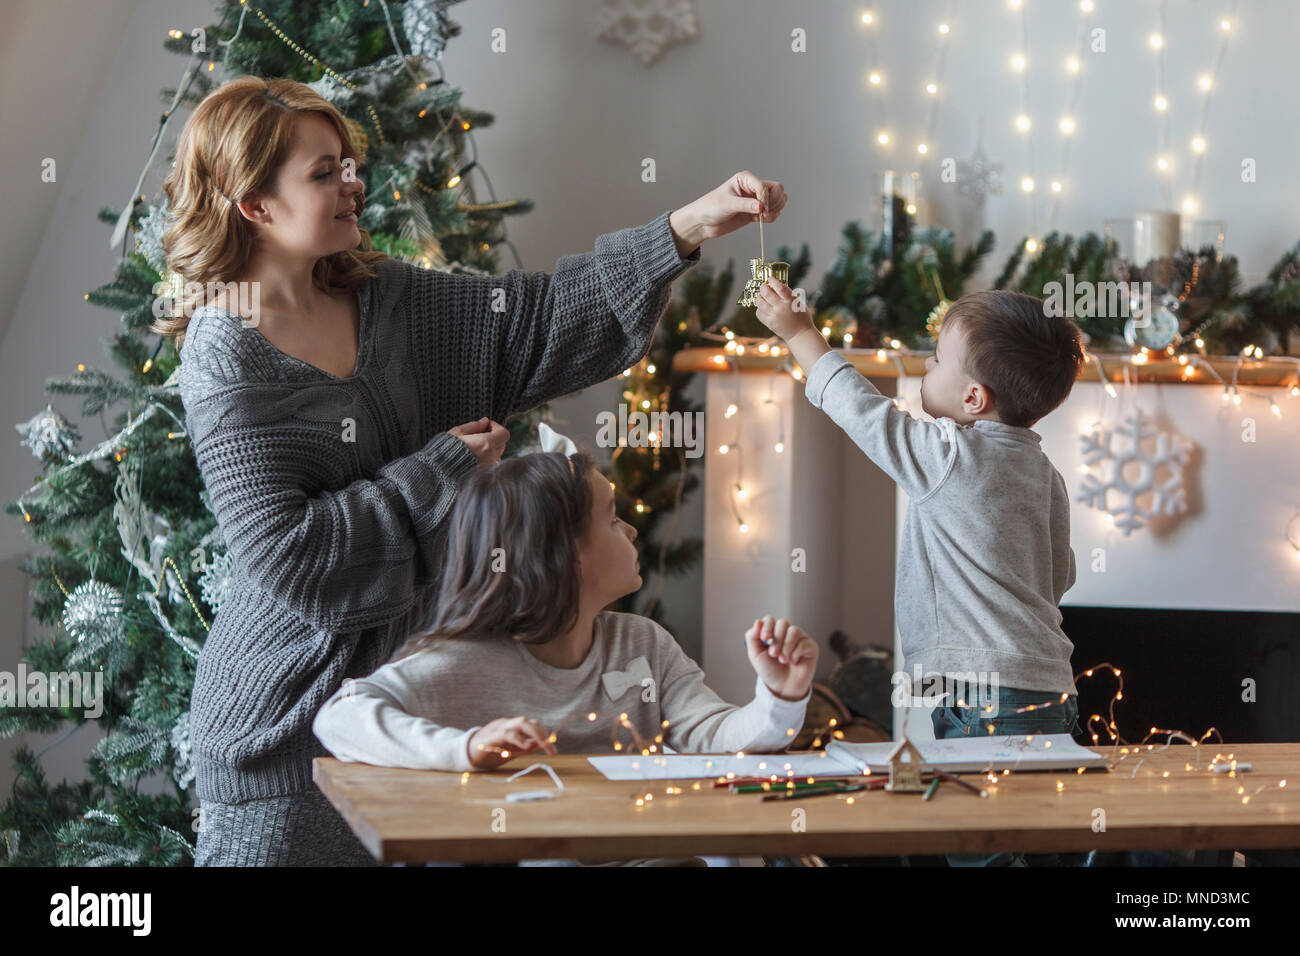 Playful woman with children at home during Christmas Stock Photo